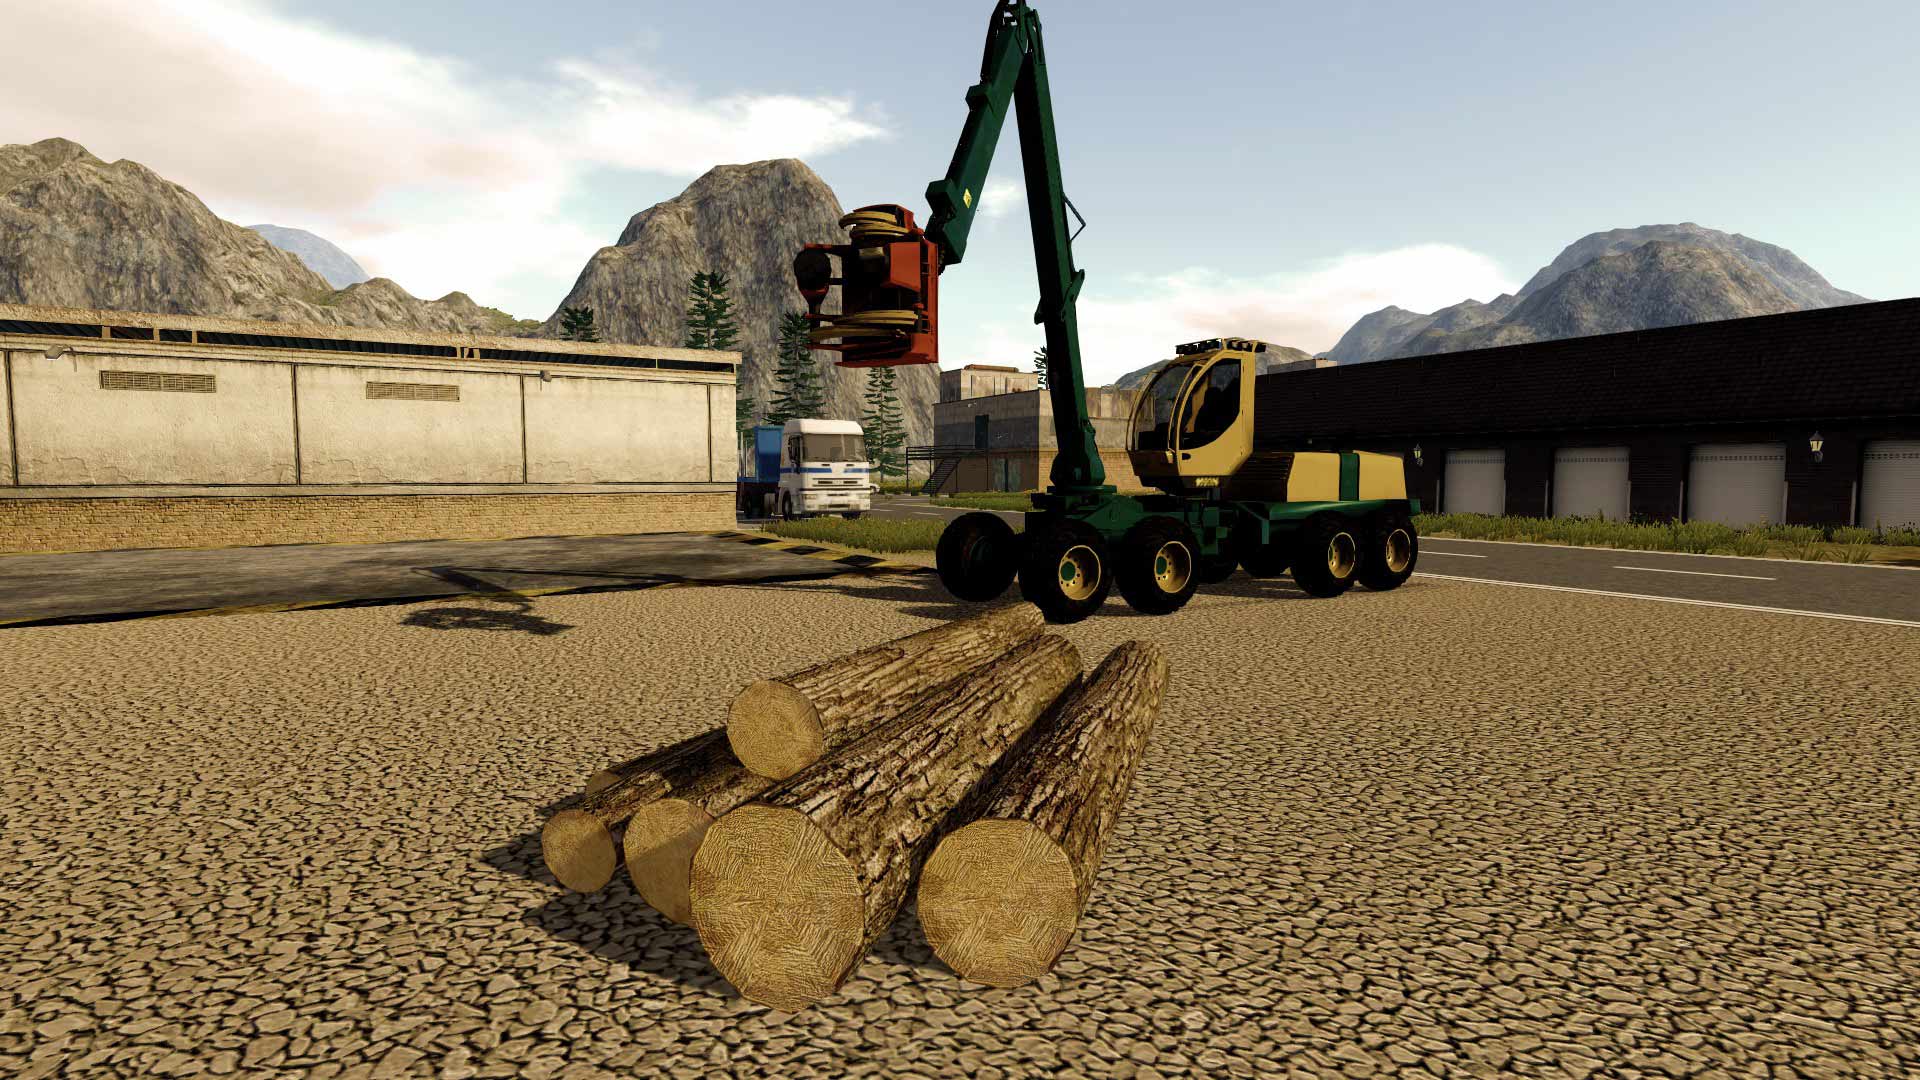 Forestry The Simulation